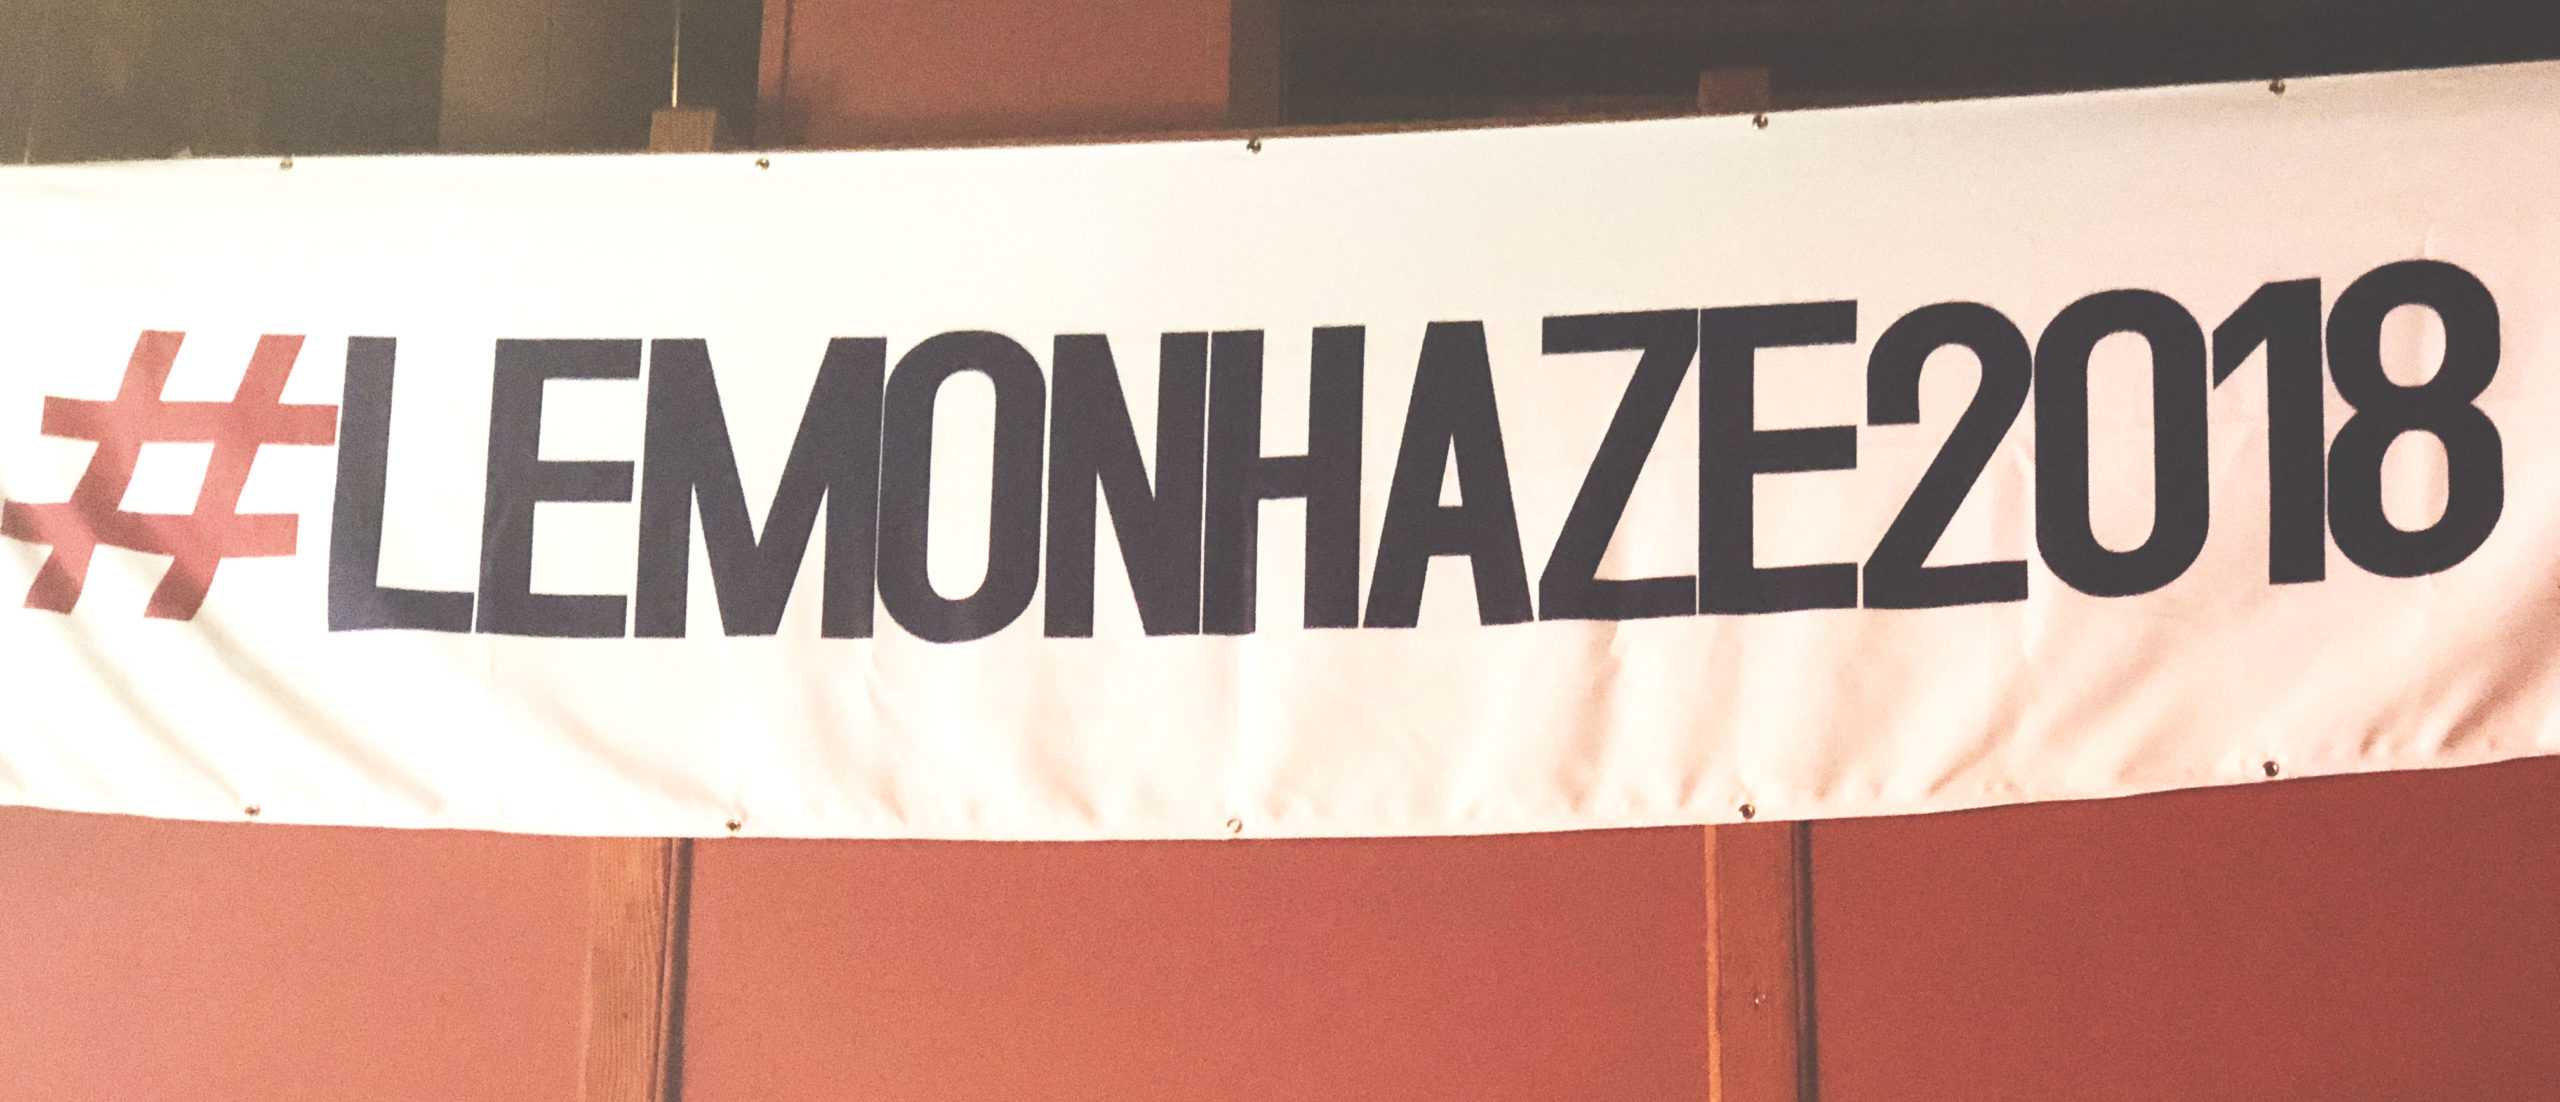 Lemonhaze Cannabis Convention is predicted to draw a crowd of thousands at the Tacoma Dome on October 25th and 26th.